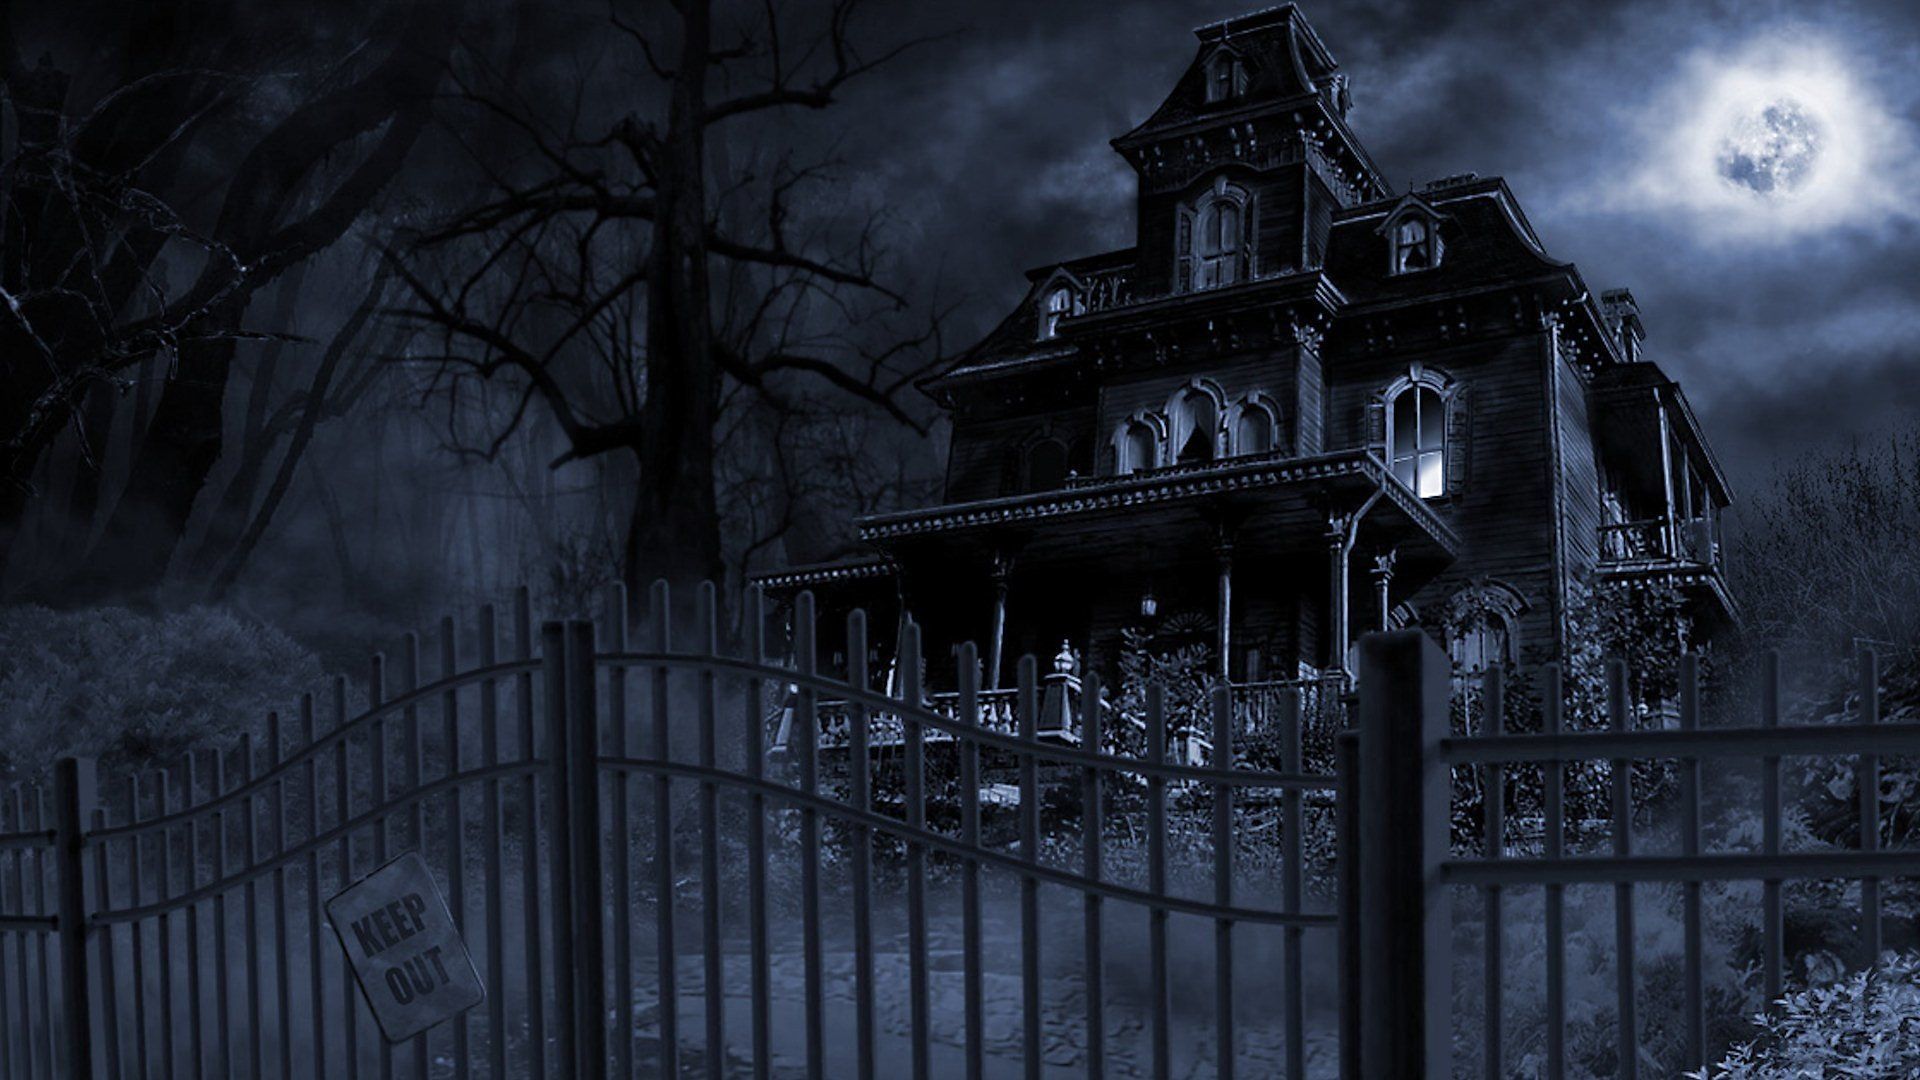 A dark and spooky house with moon in the background - Creepy